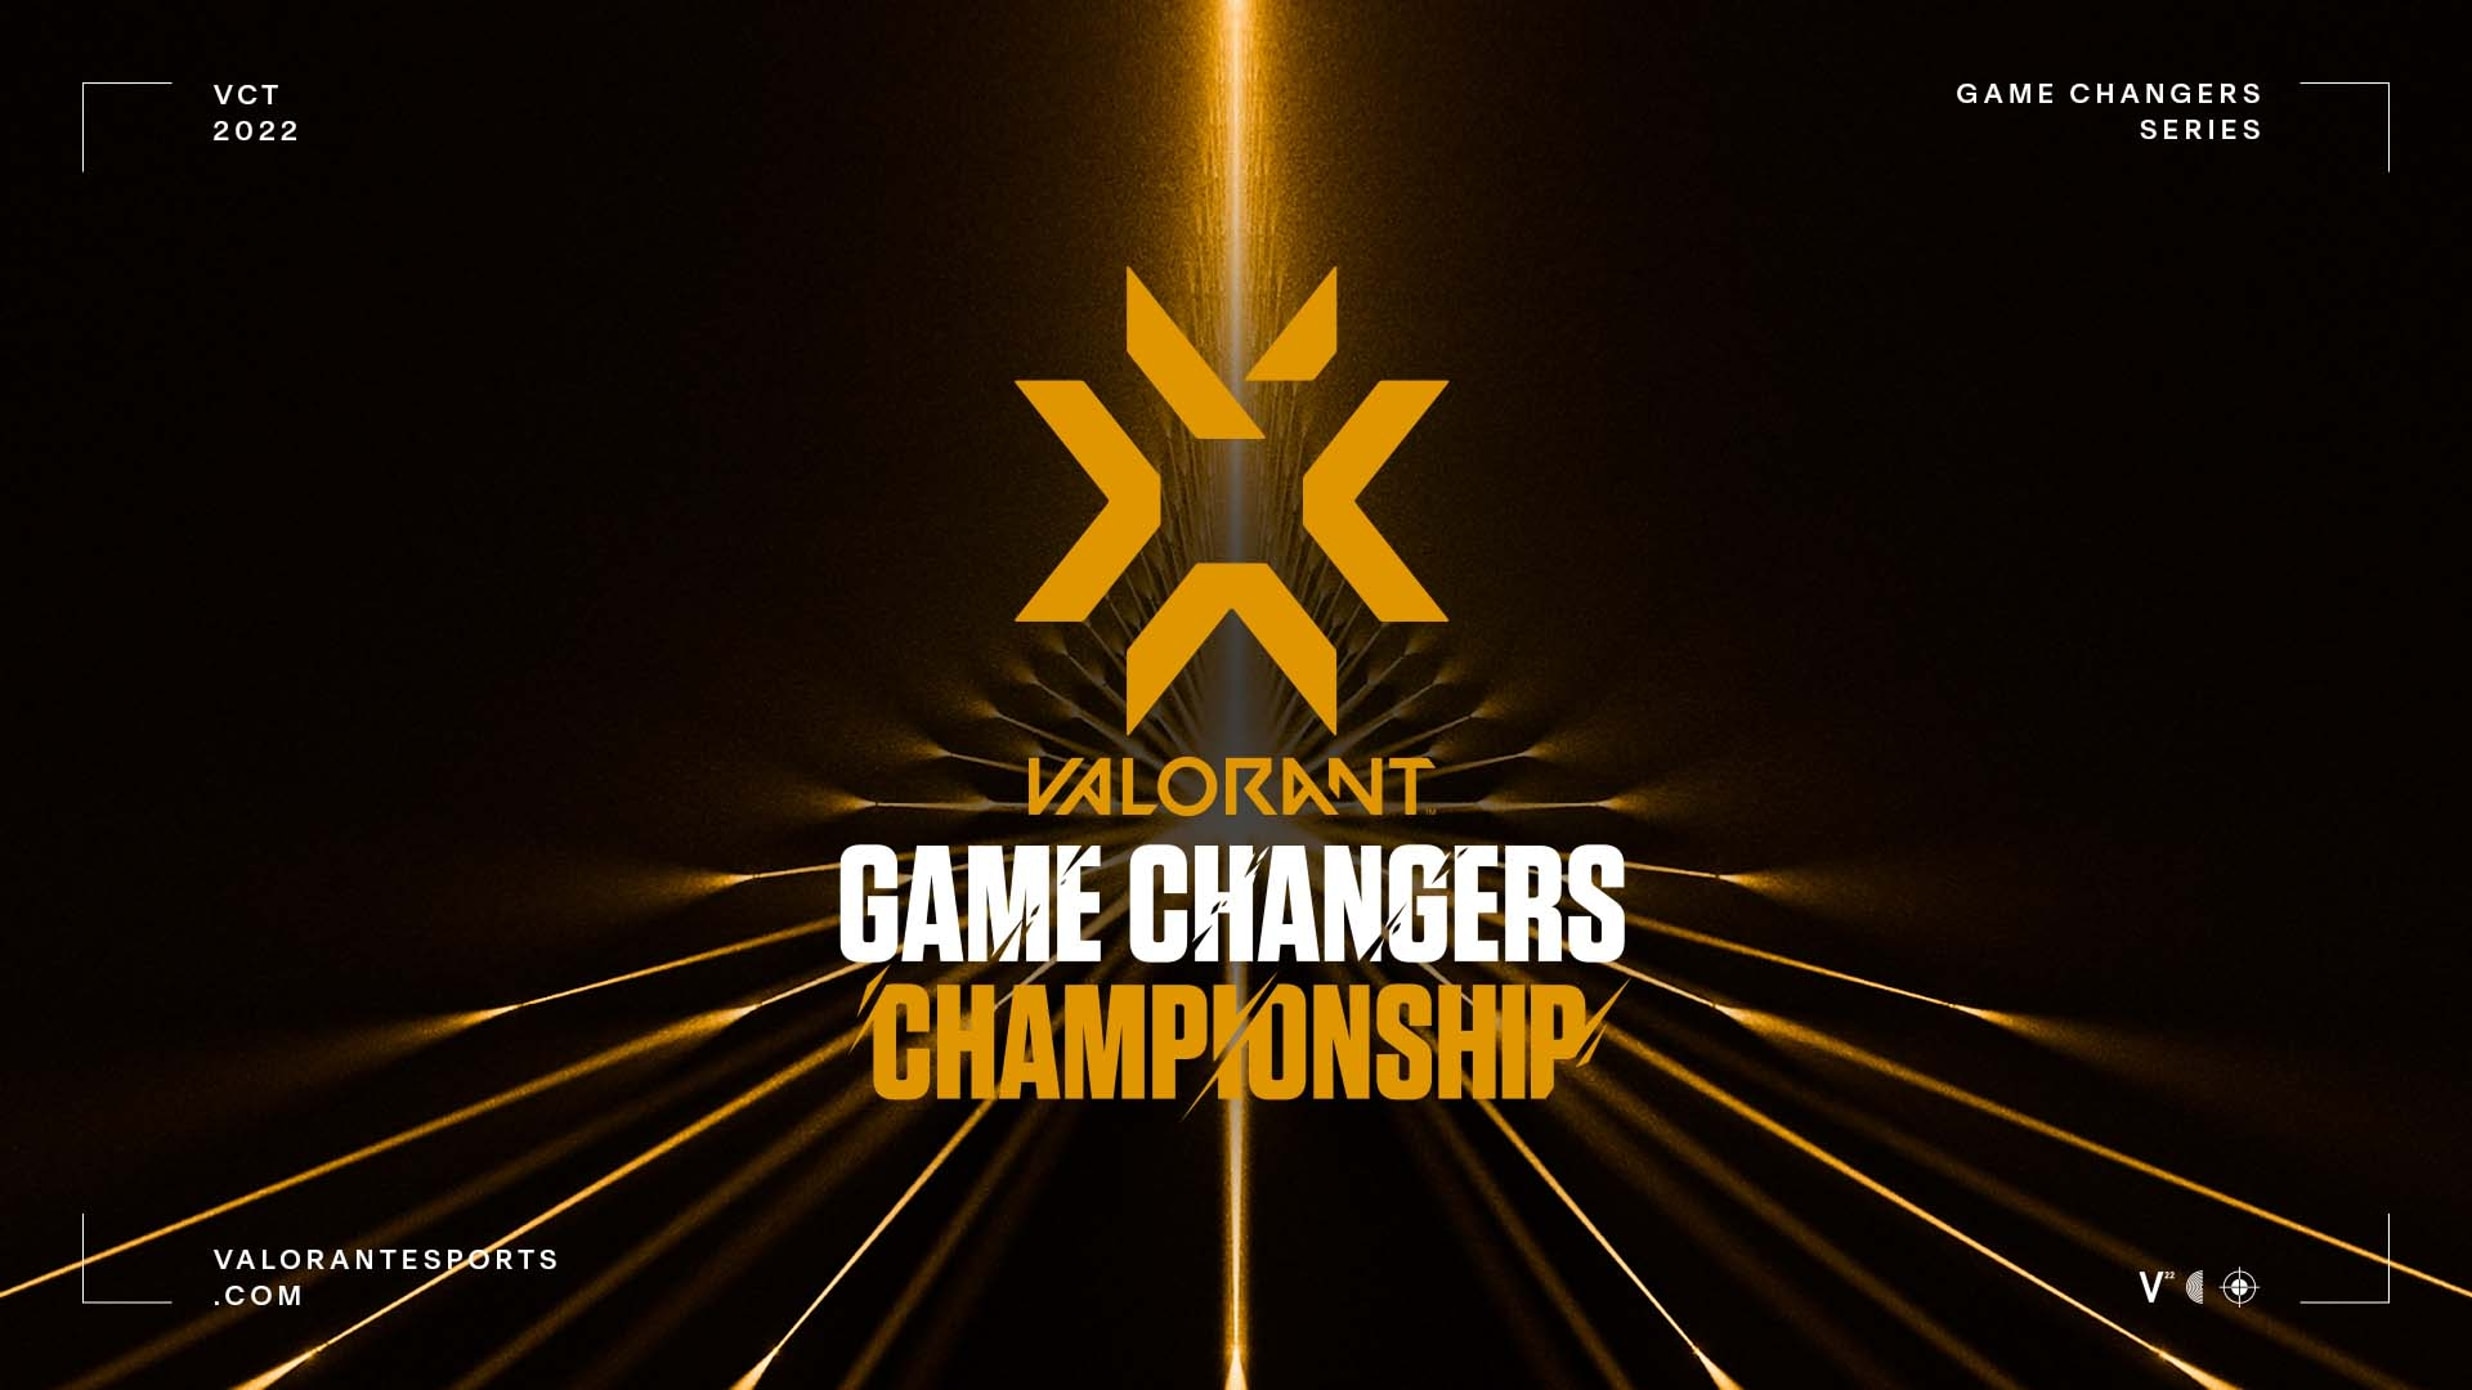 Valorant Game Changers Championship comes to Berlin in November